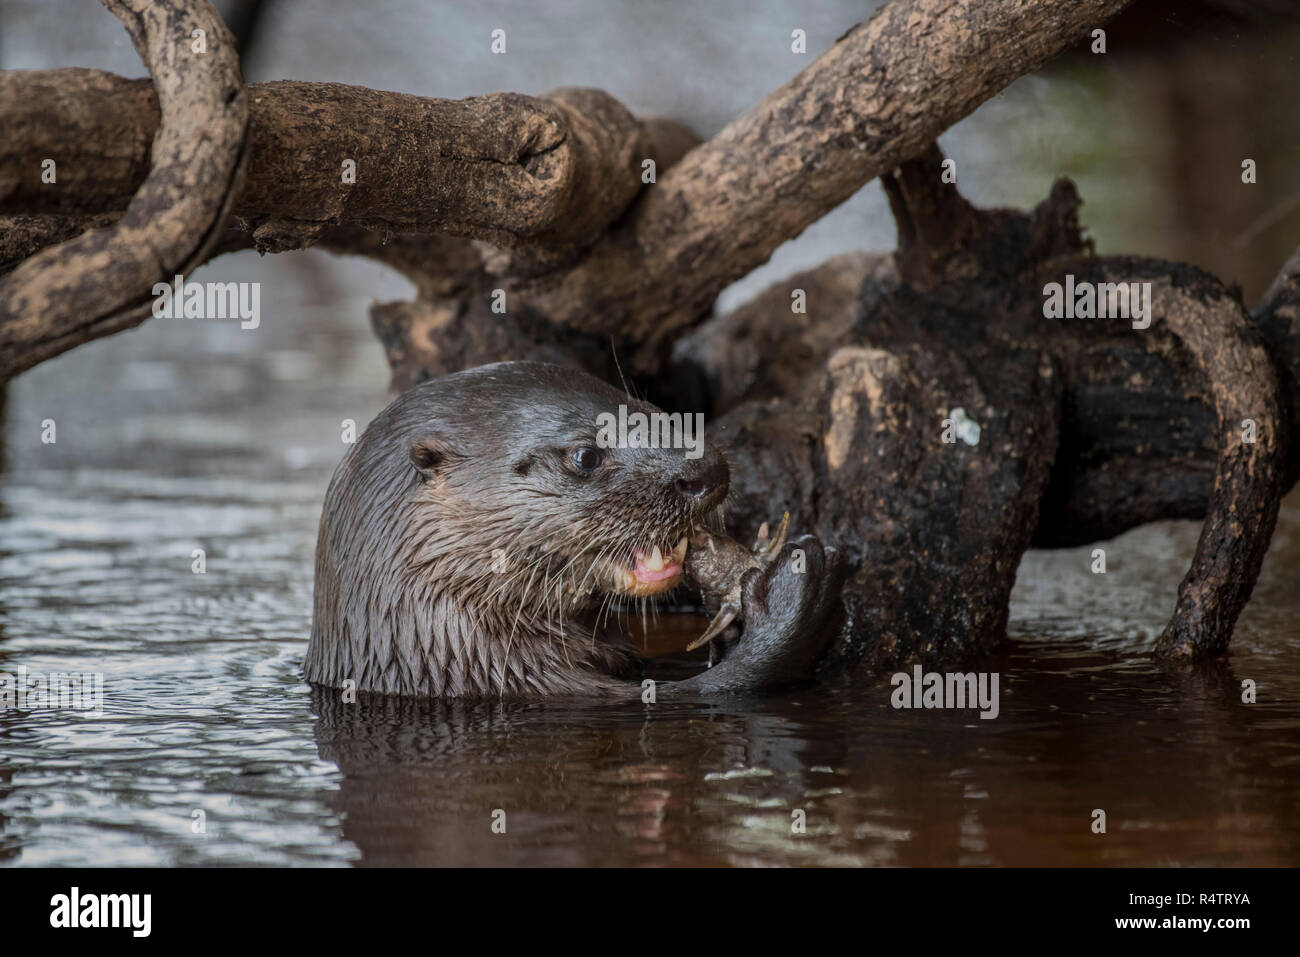 Neotropical otter (Lontra longicaudis) feeding on a tree root in water, Pantanal, Mato Grosso do Sul, Brazil Stock Photo